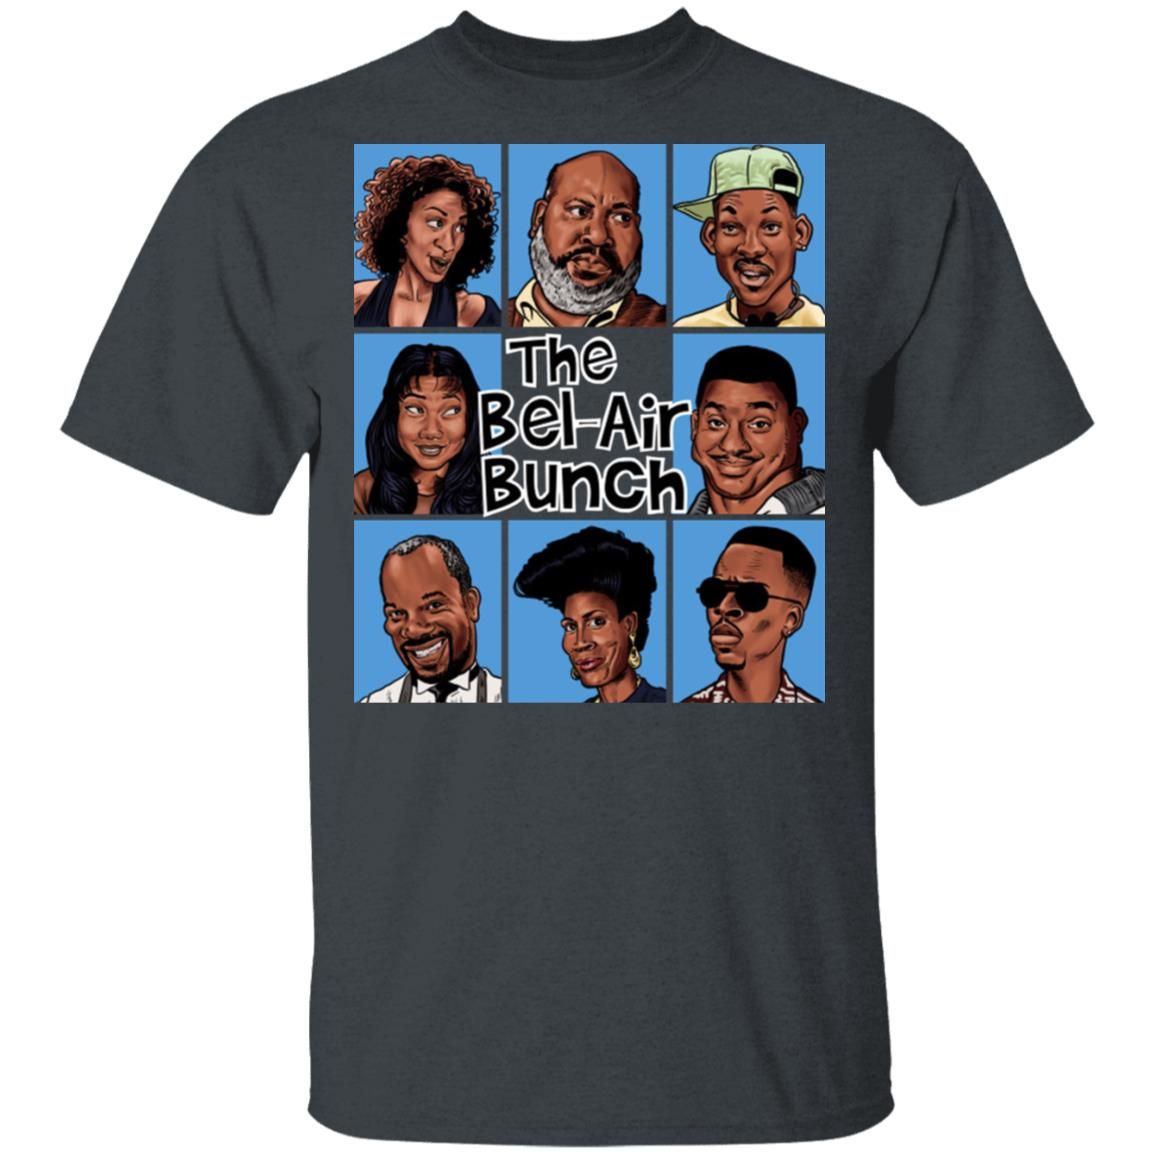 The Bel Air Bunch Fresh Prince Of Bel Air Shirt Style: Classic T-Shirt, Color: Dark Heather